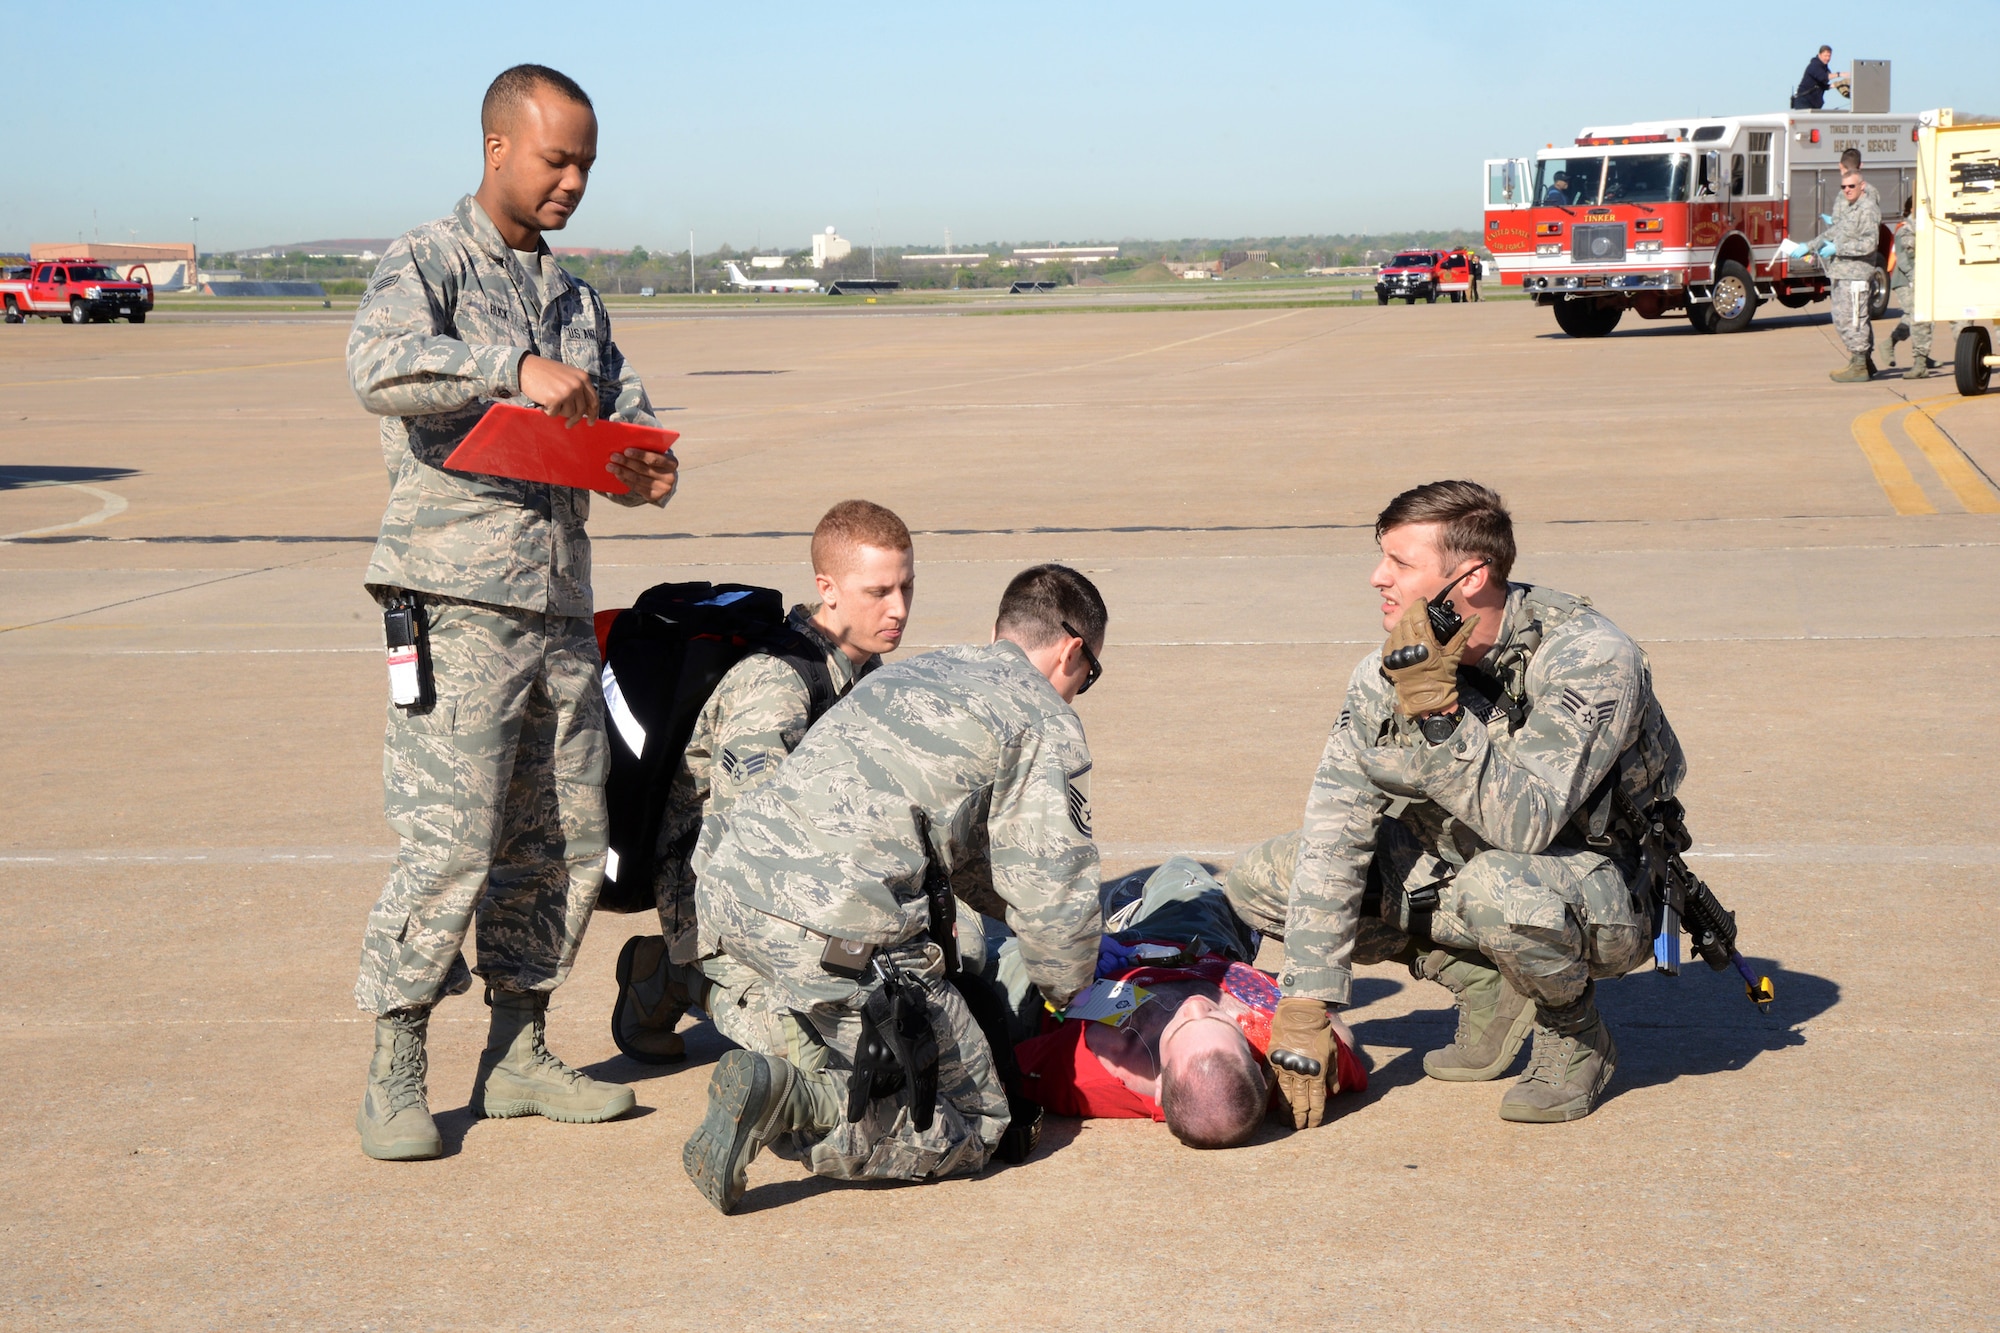 Medics with the 72nd Medical Group, along with members of the 72nd Security Forces Squadron, help stabilize a moulage victim during the April 6 emergency response exercise. About 150 volunteers helped bring to life a more realistic-feeling exercise, which enabled first responders to know how to better react in real world situations. (Air Force photo by Kelly White)